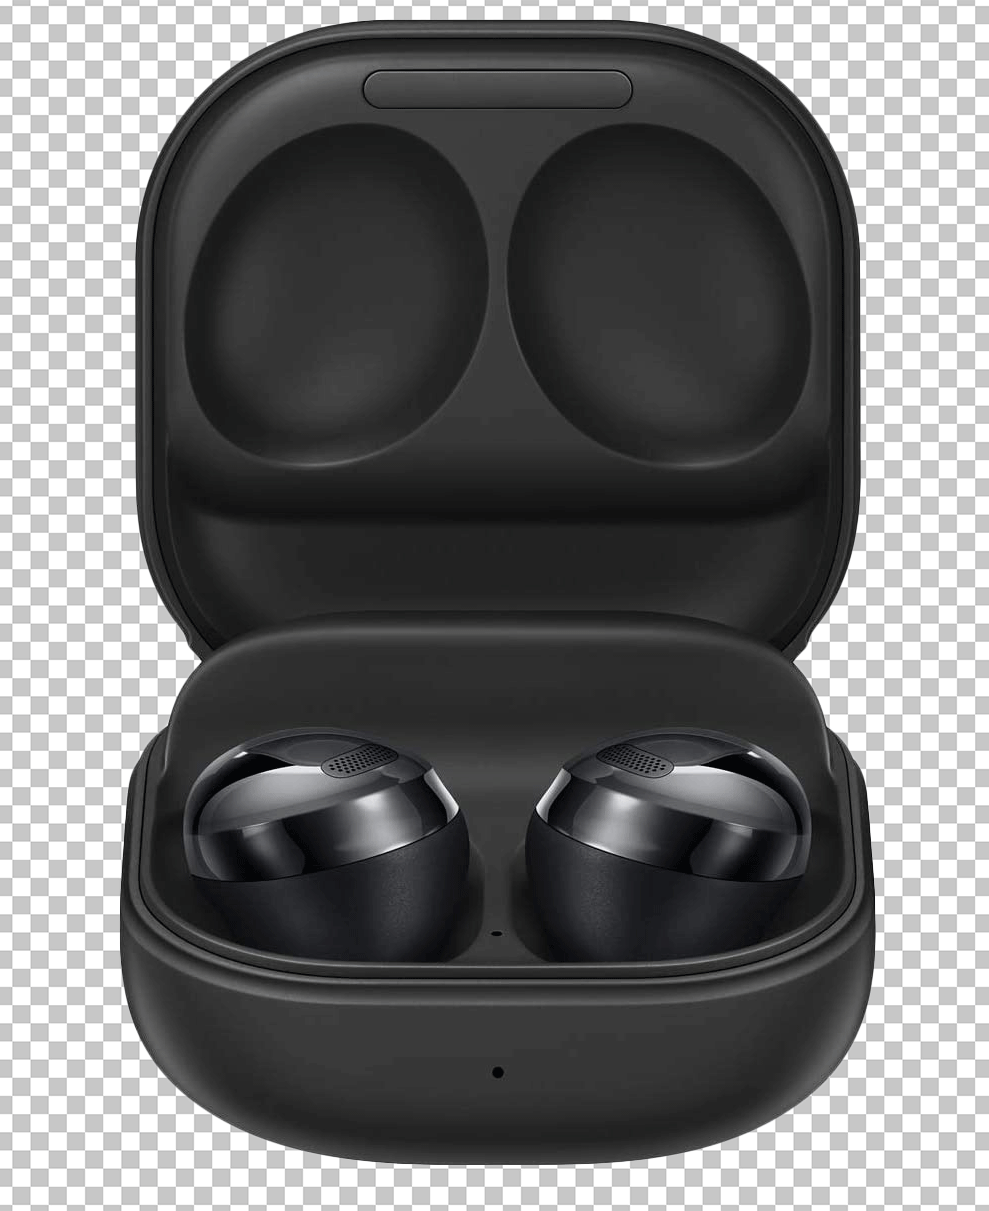 Samsung galaxy earbuds pro png image